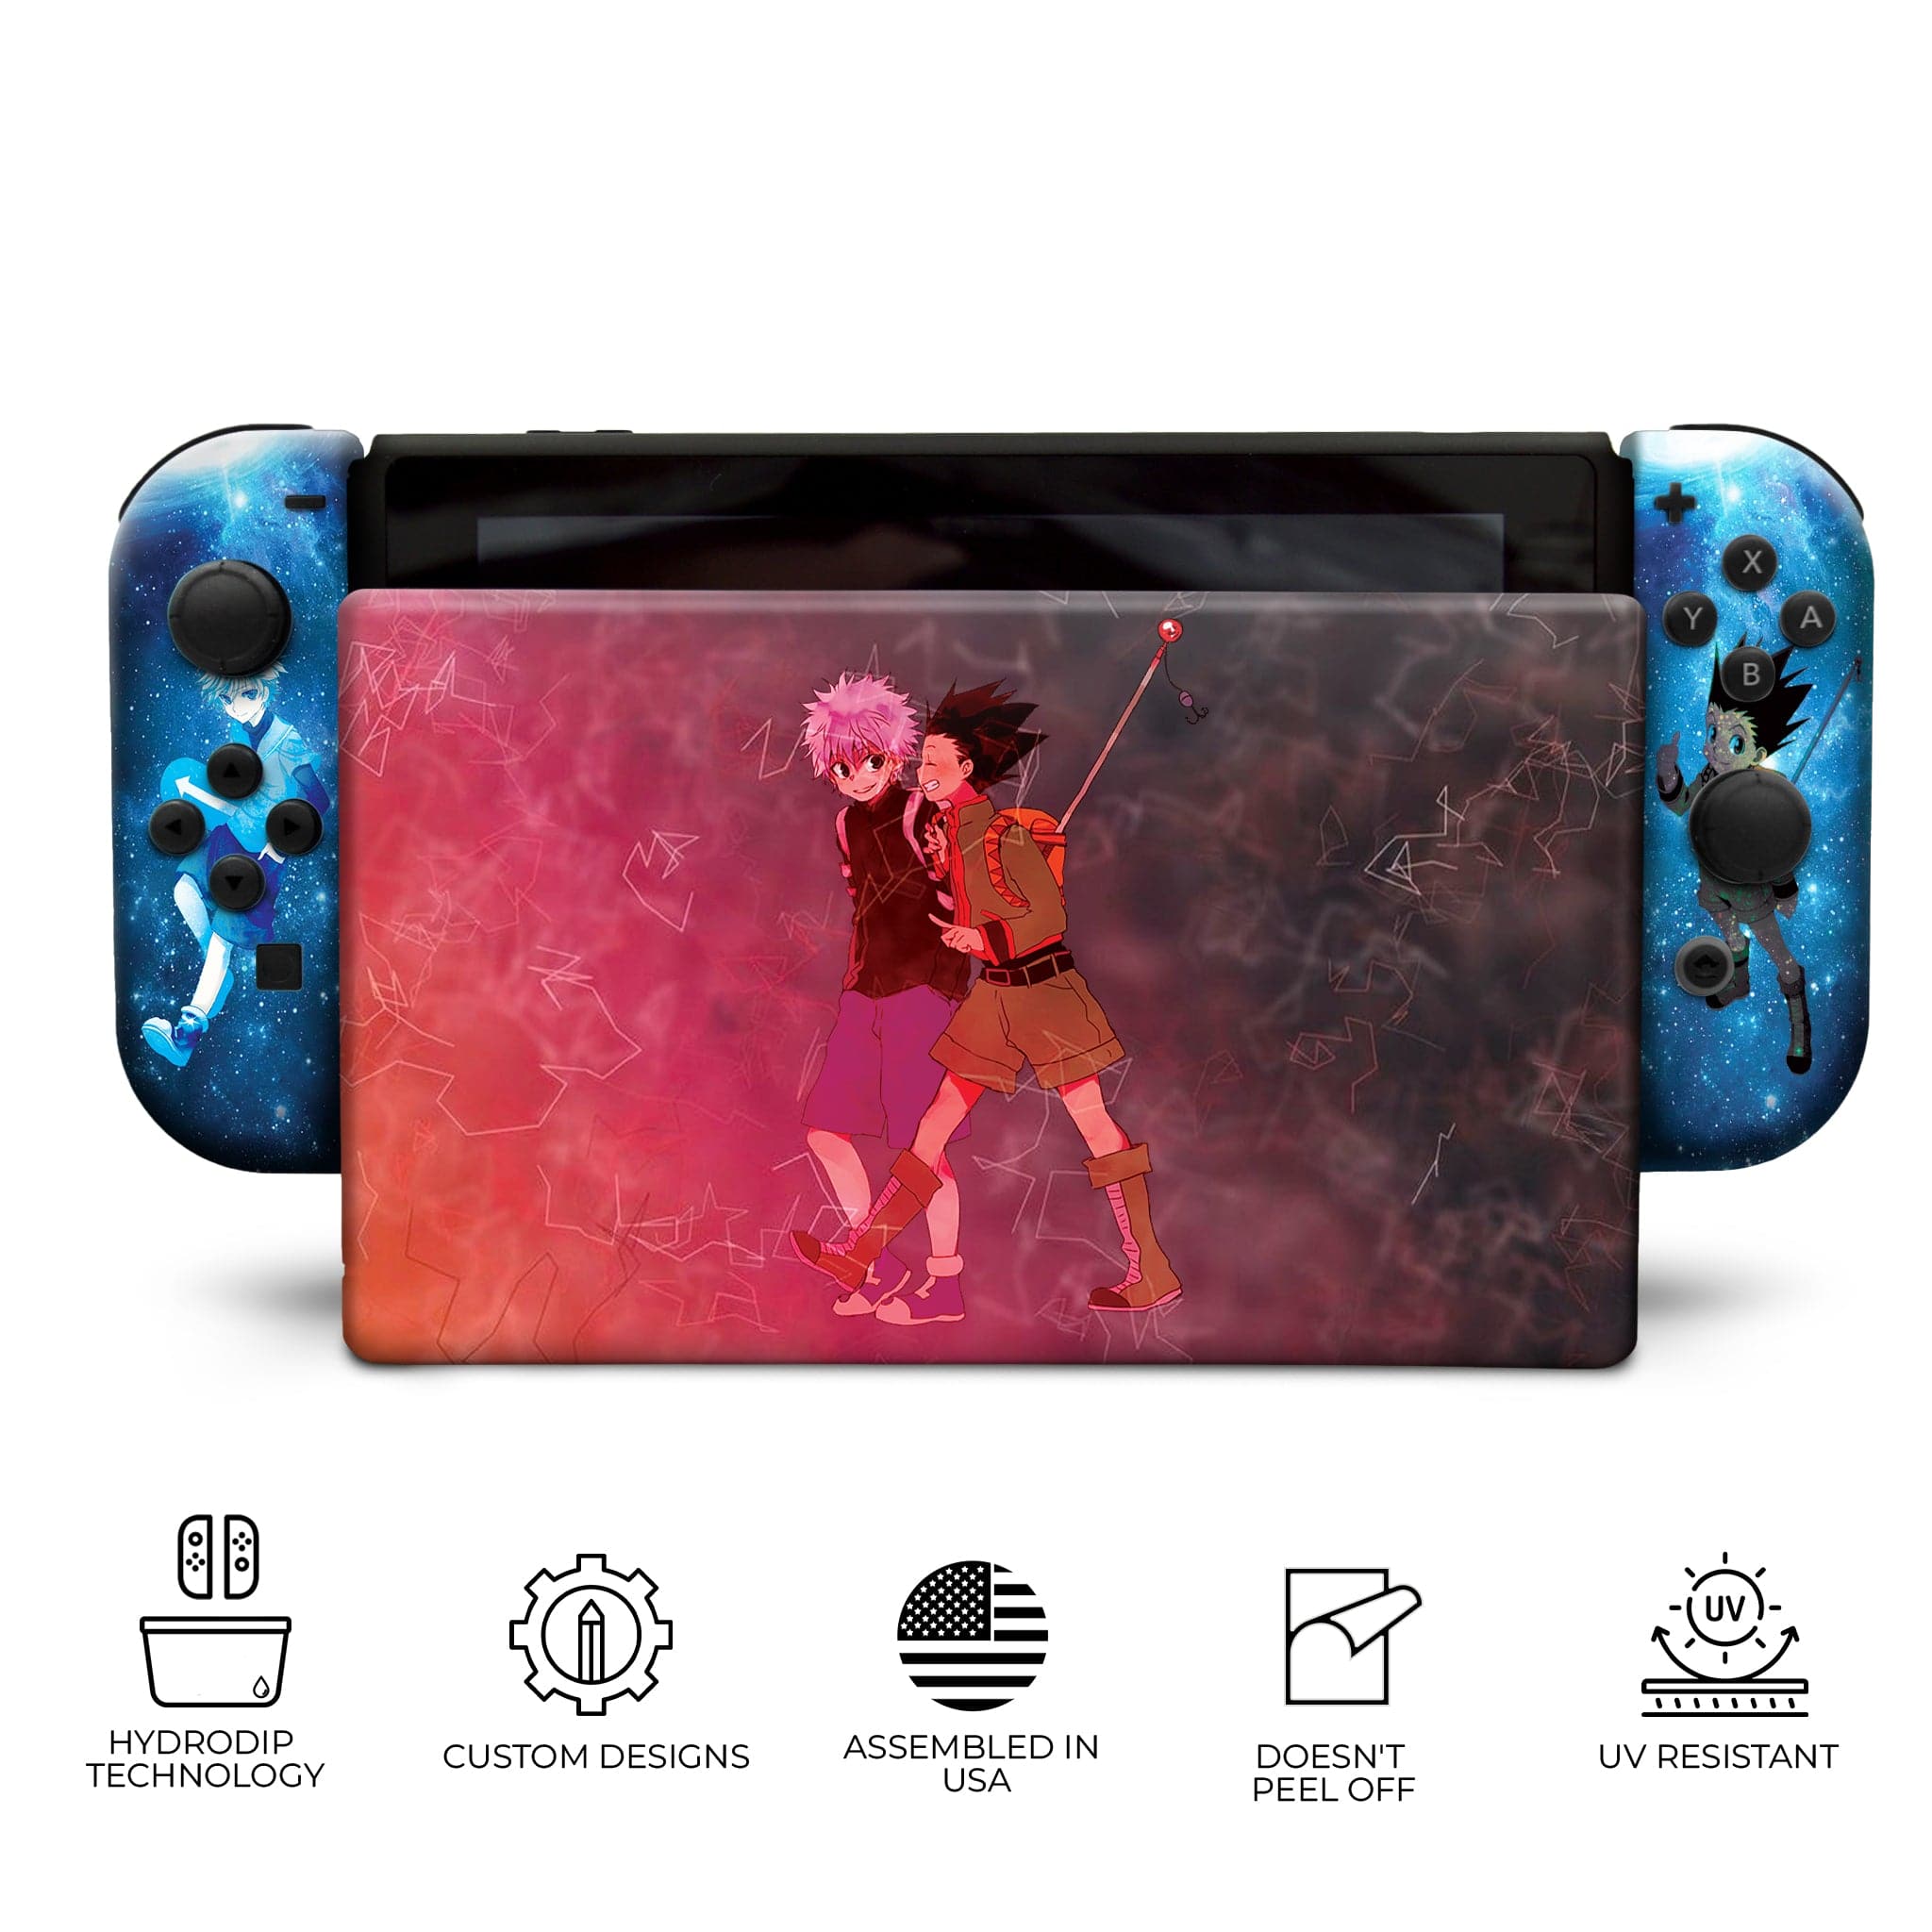 Gon and Kilhua of HxH Inspired Design Nintendo Switch Full Set by Nintendo